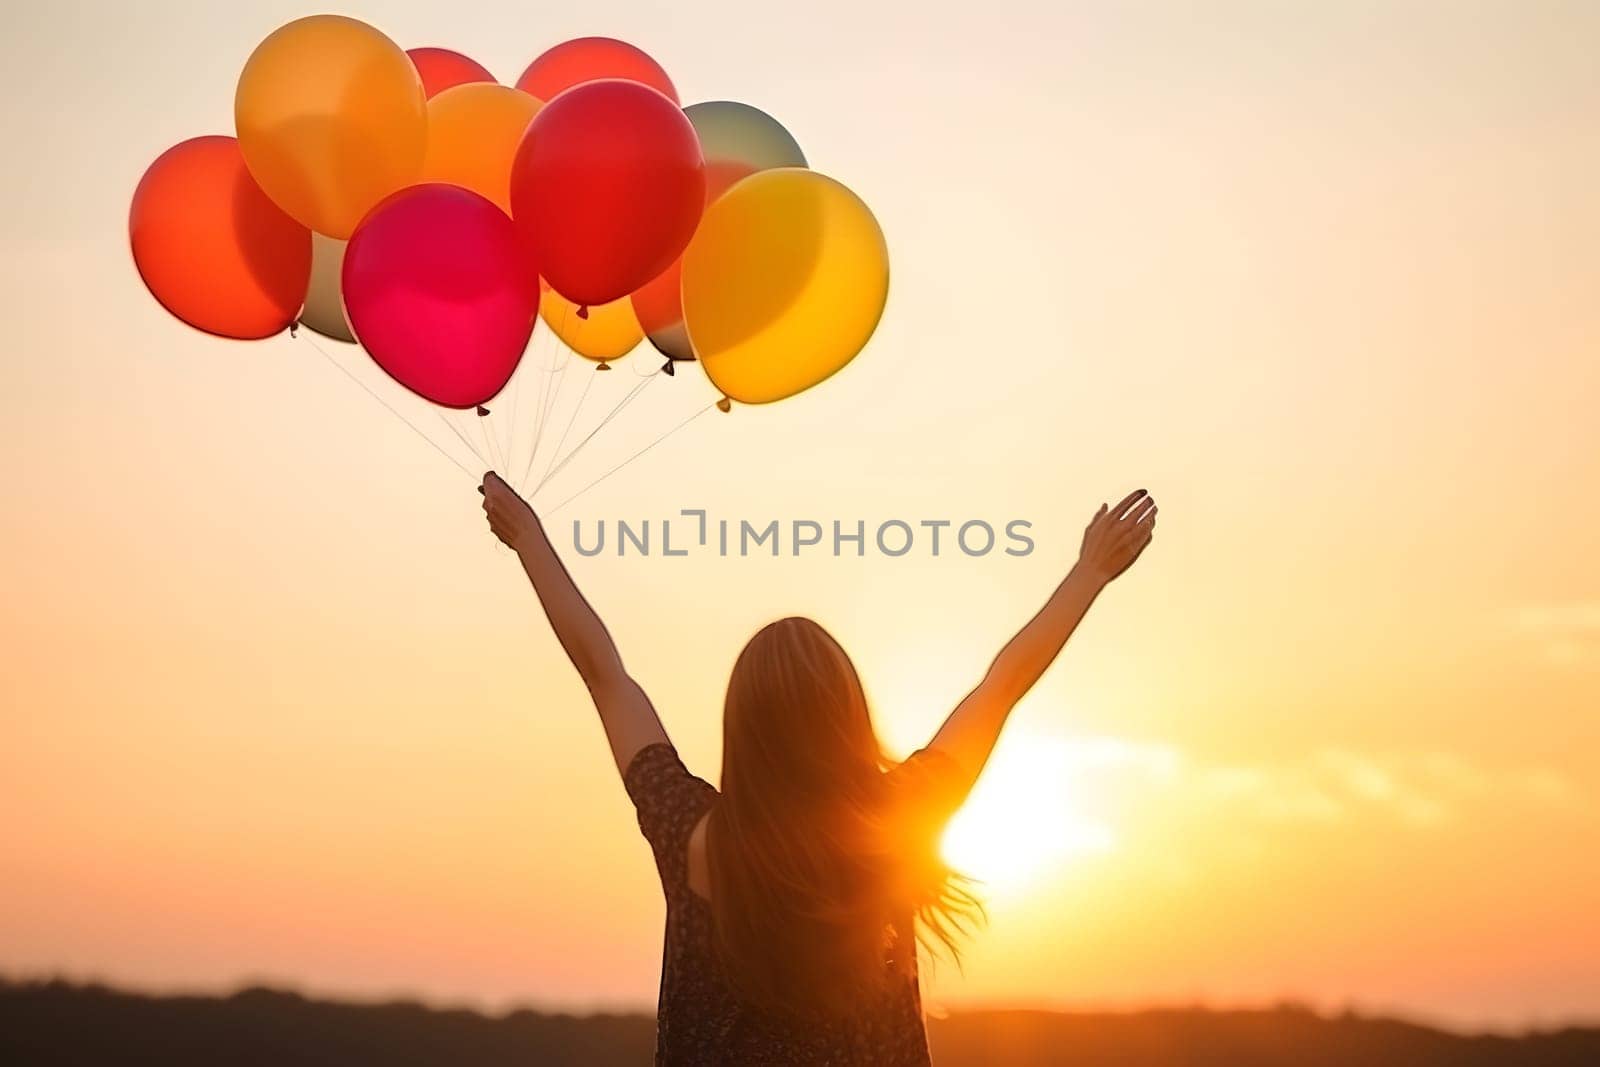 inspirational happy life woman with colored air ballons rising hands in the air, neural network generated picture. Digitally generated image. Not based on any actual person or scene.